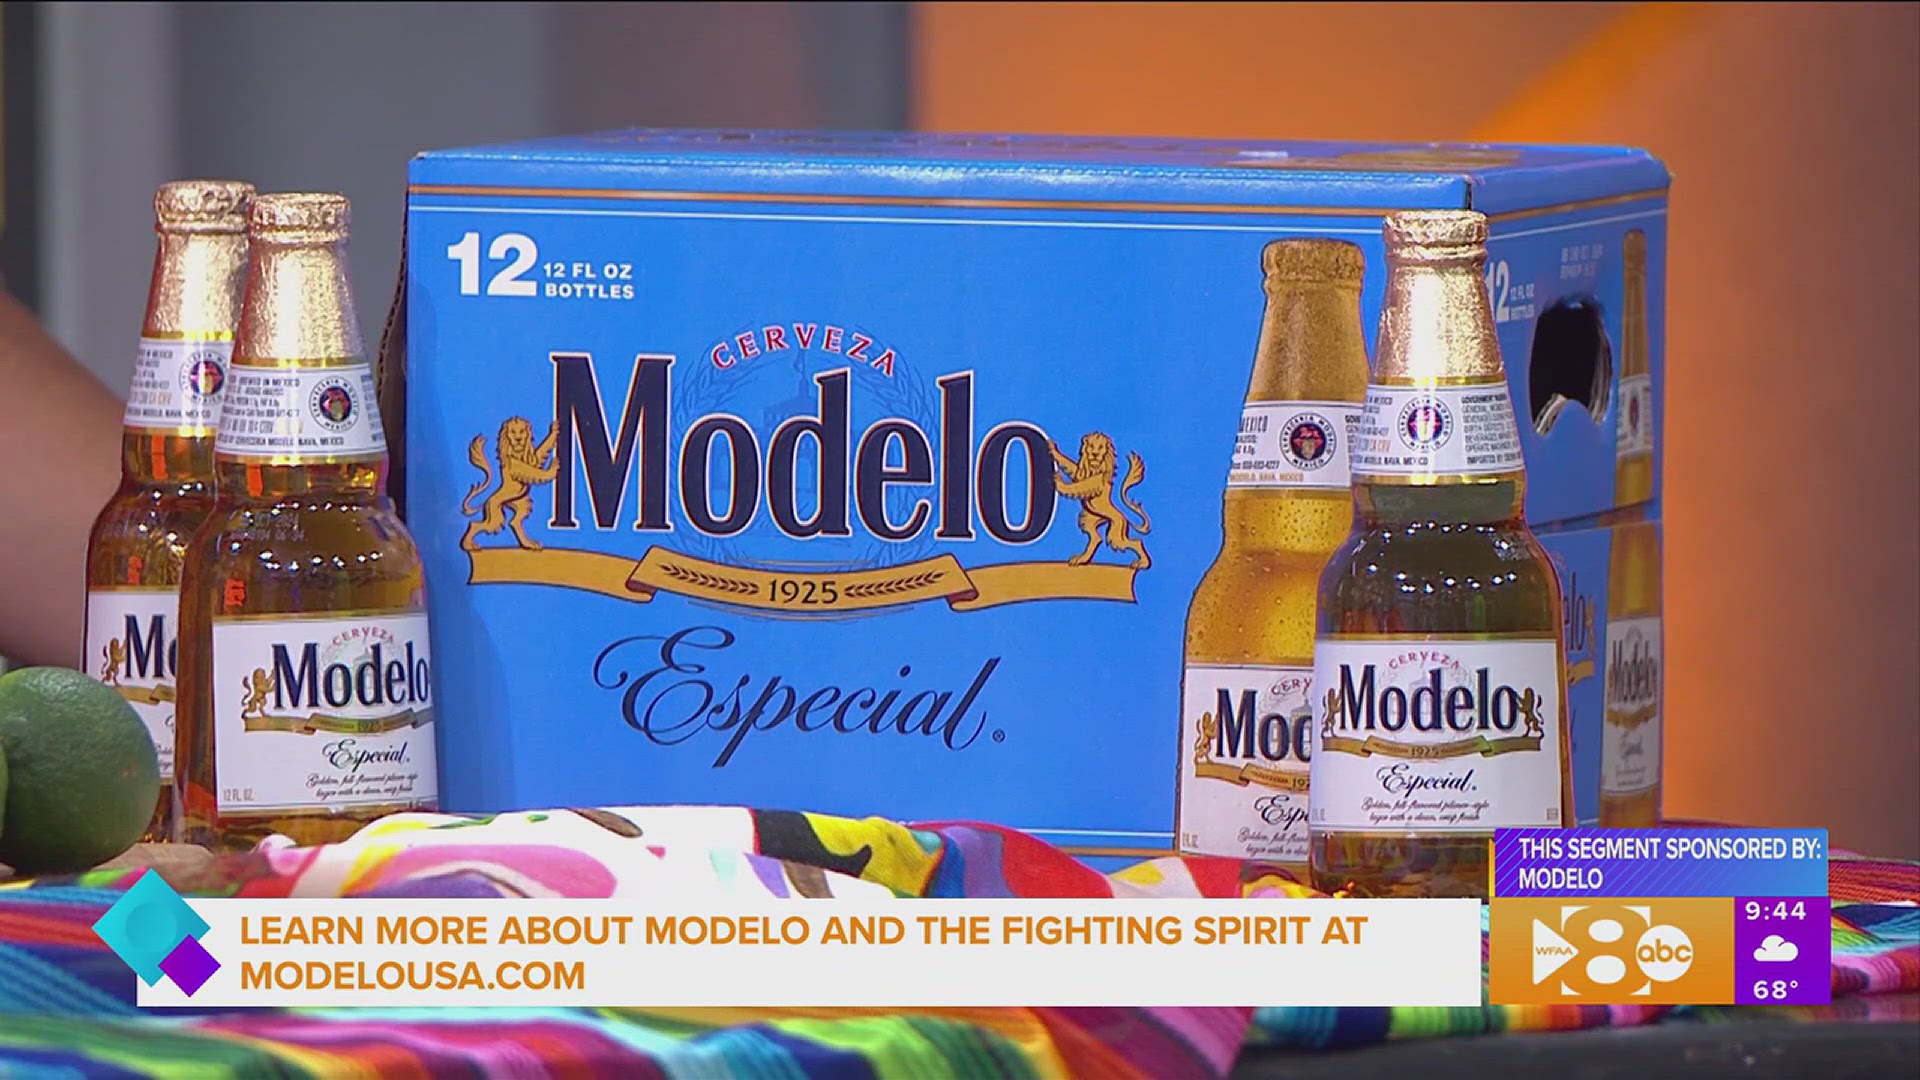 Find out how Modelo can brighten any celebration you have planned for spring and beyond. Go to modelousa.com for more information.